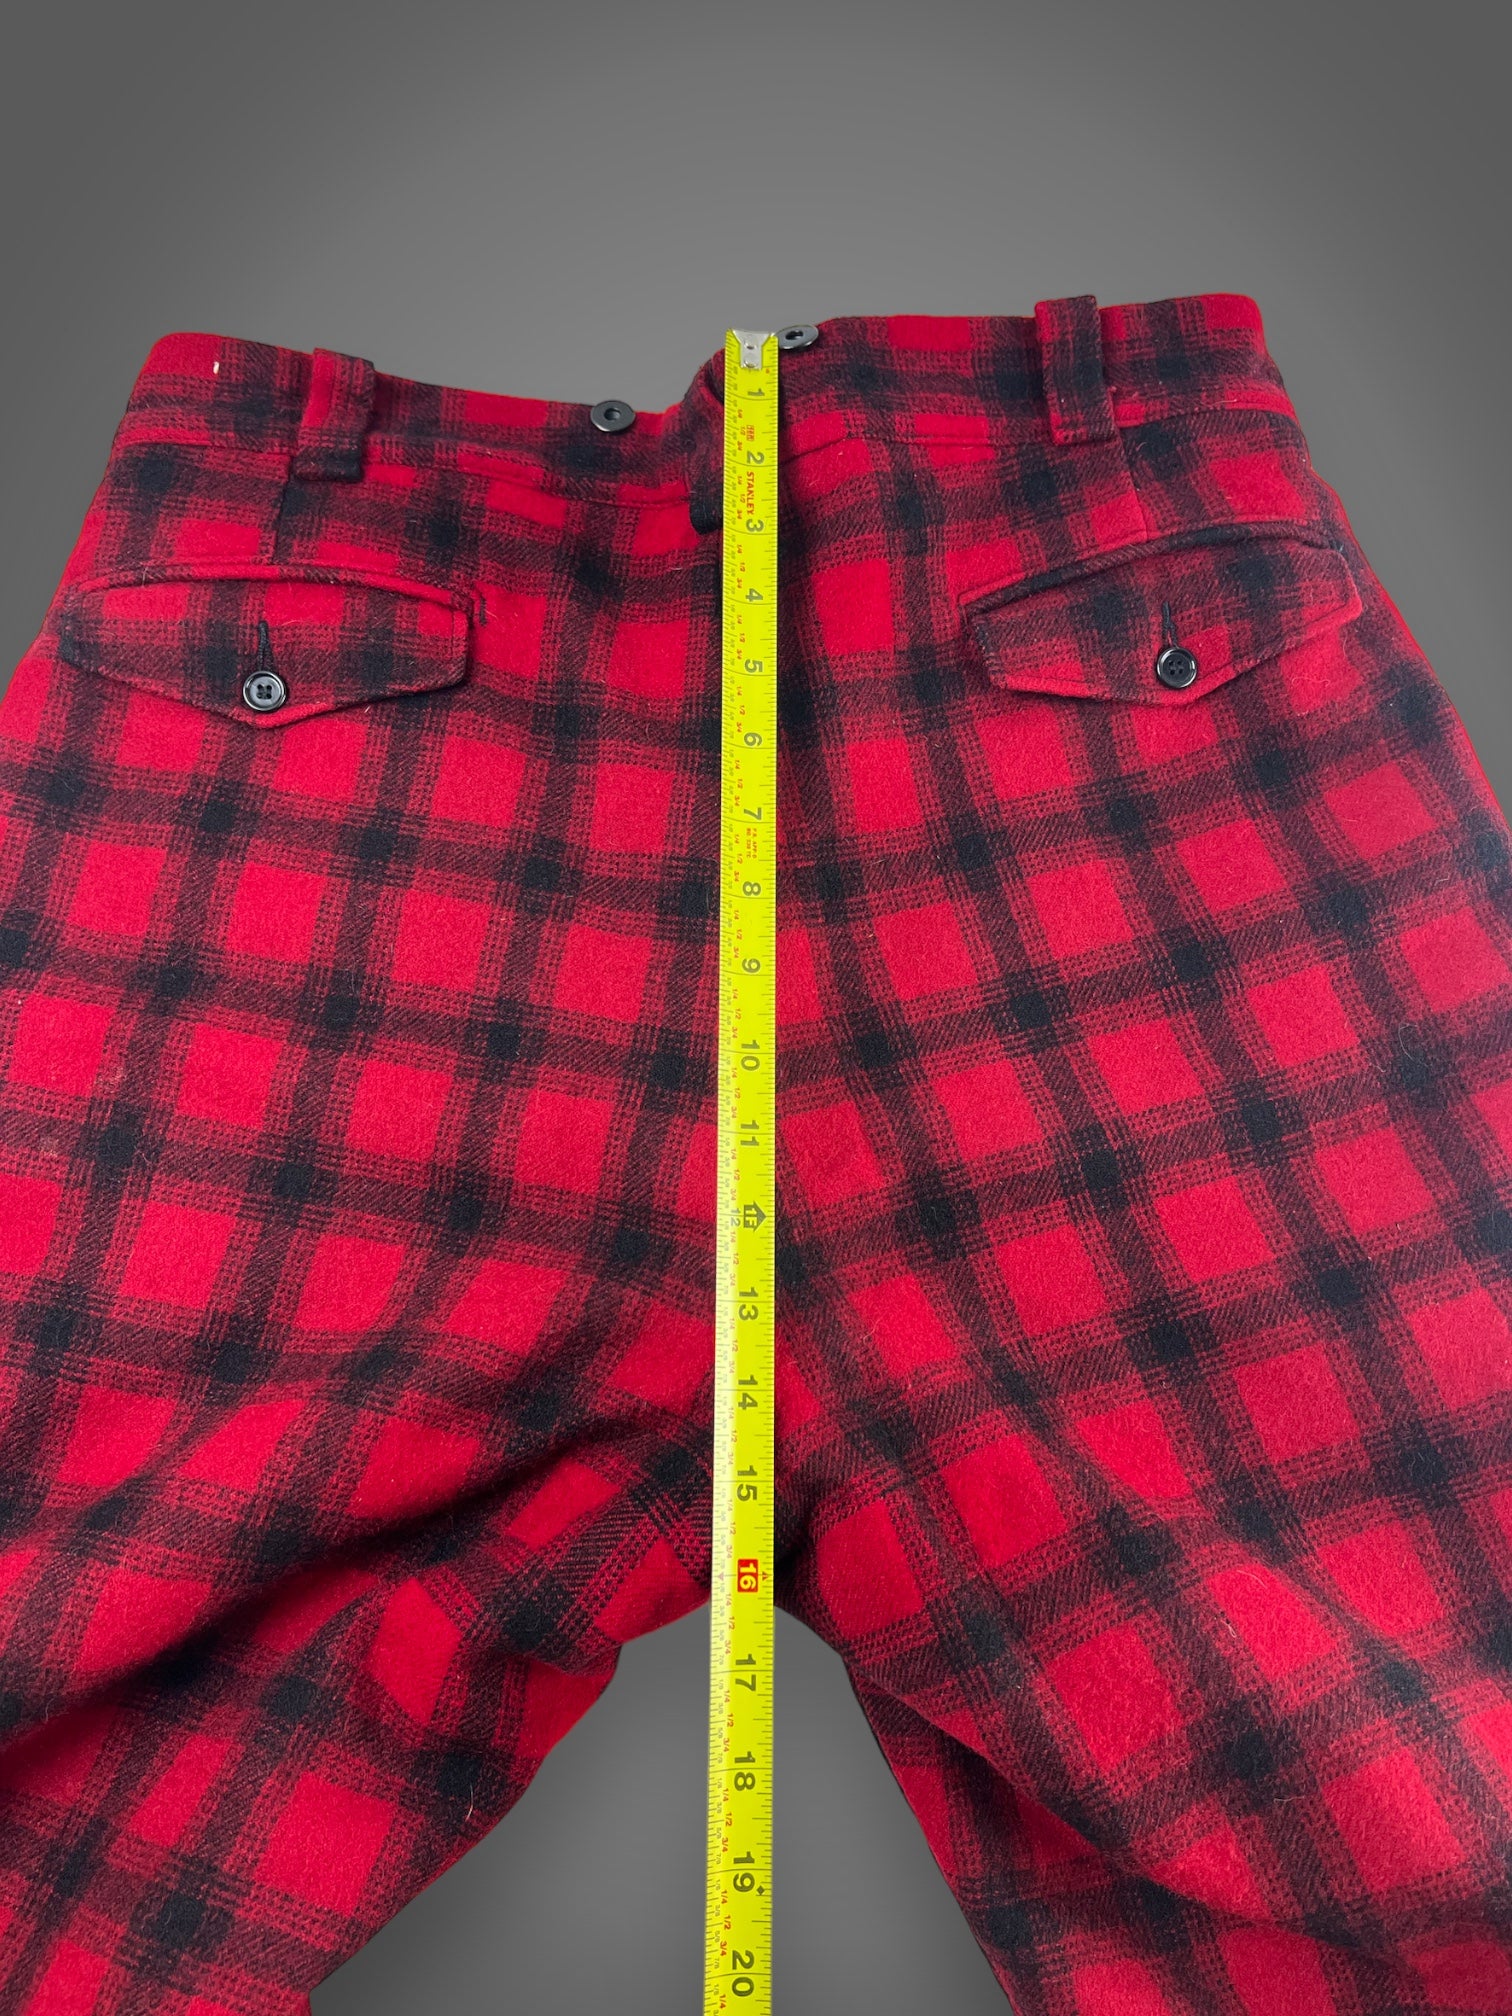 80s Woolrich fully lined Buffalo plaid wool pants 38x30.5”